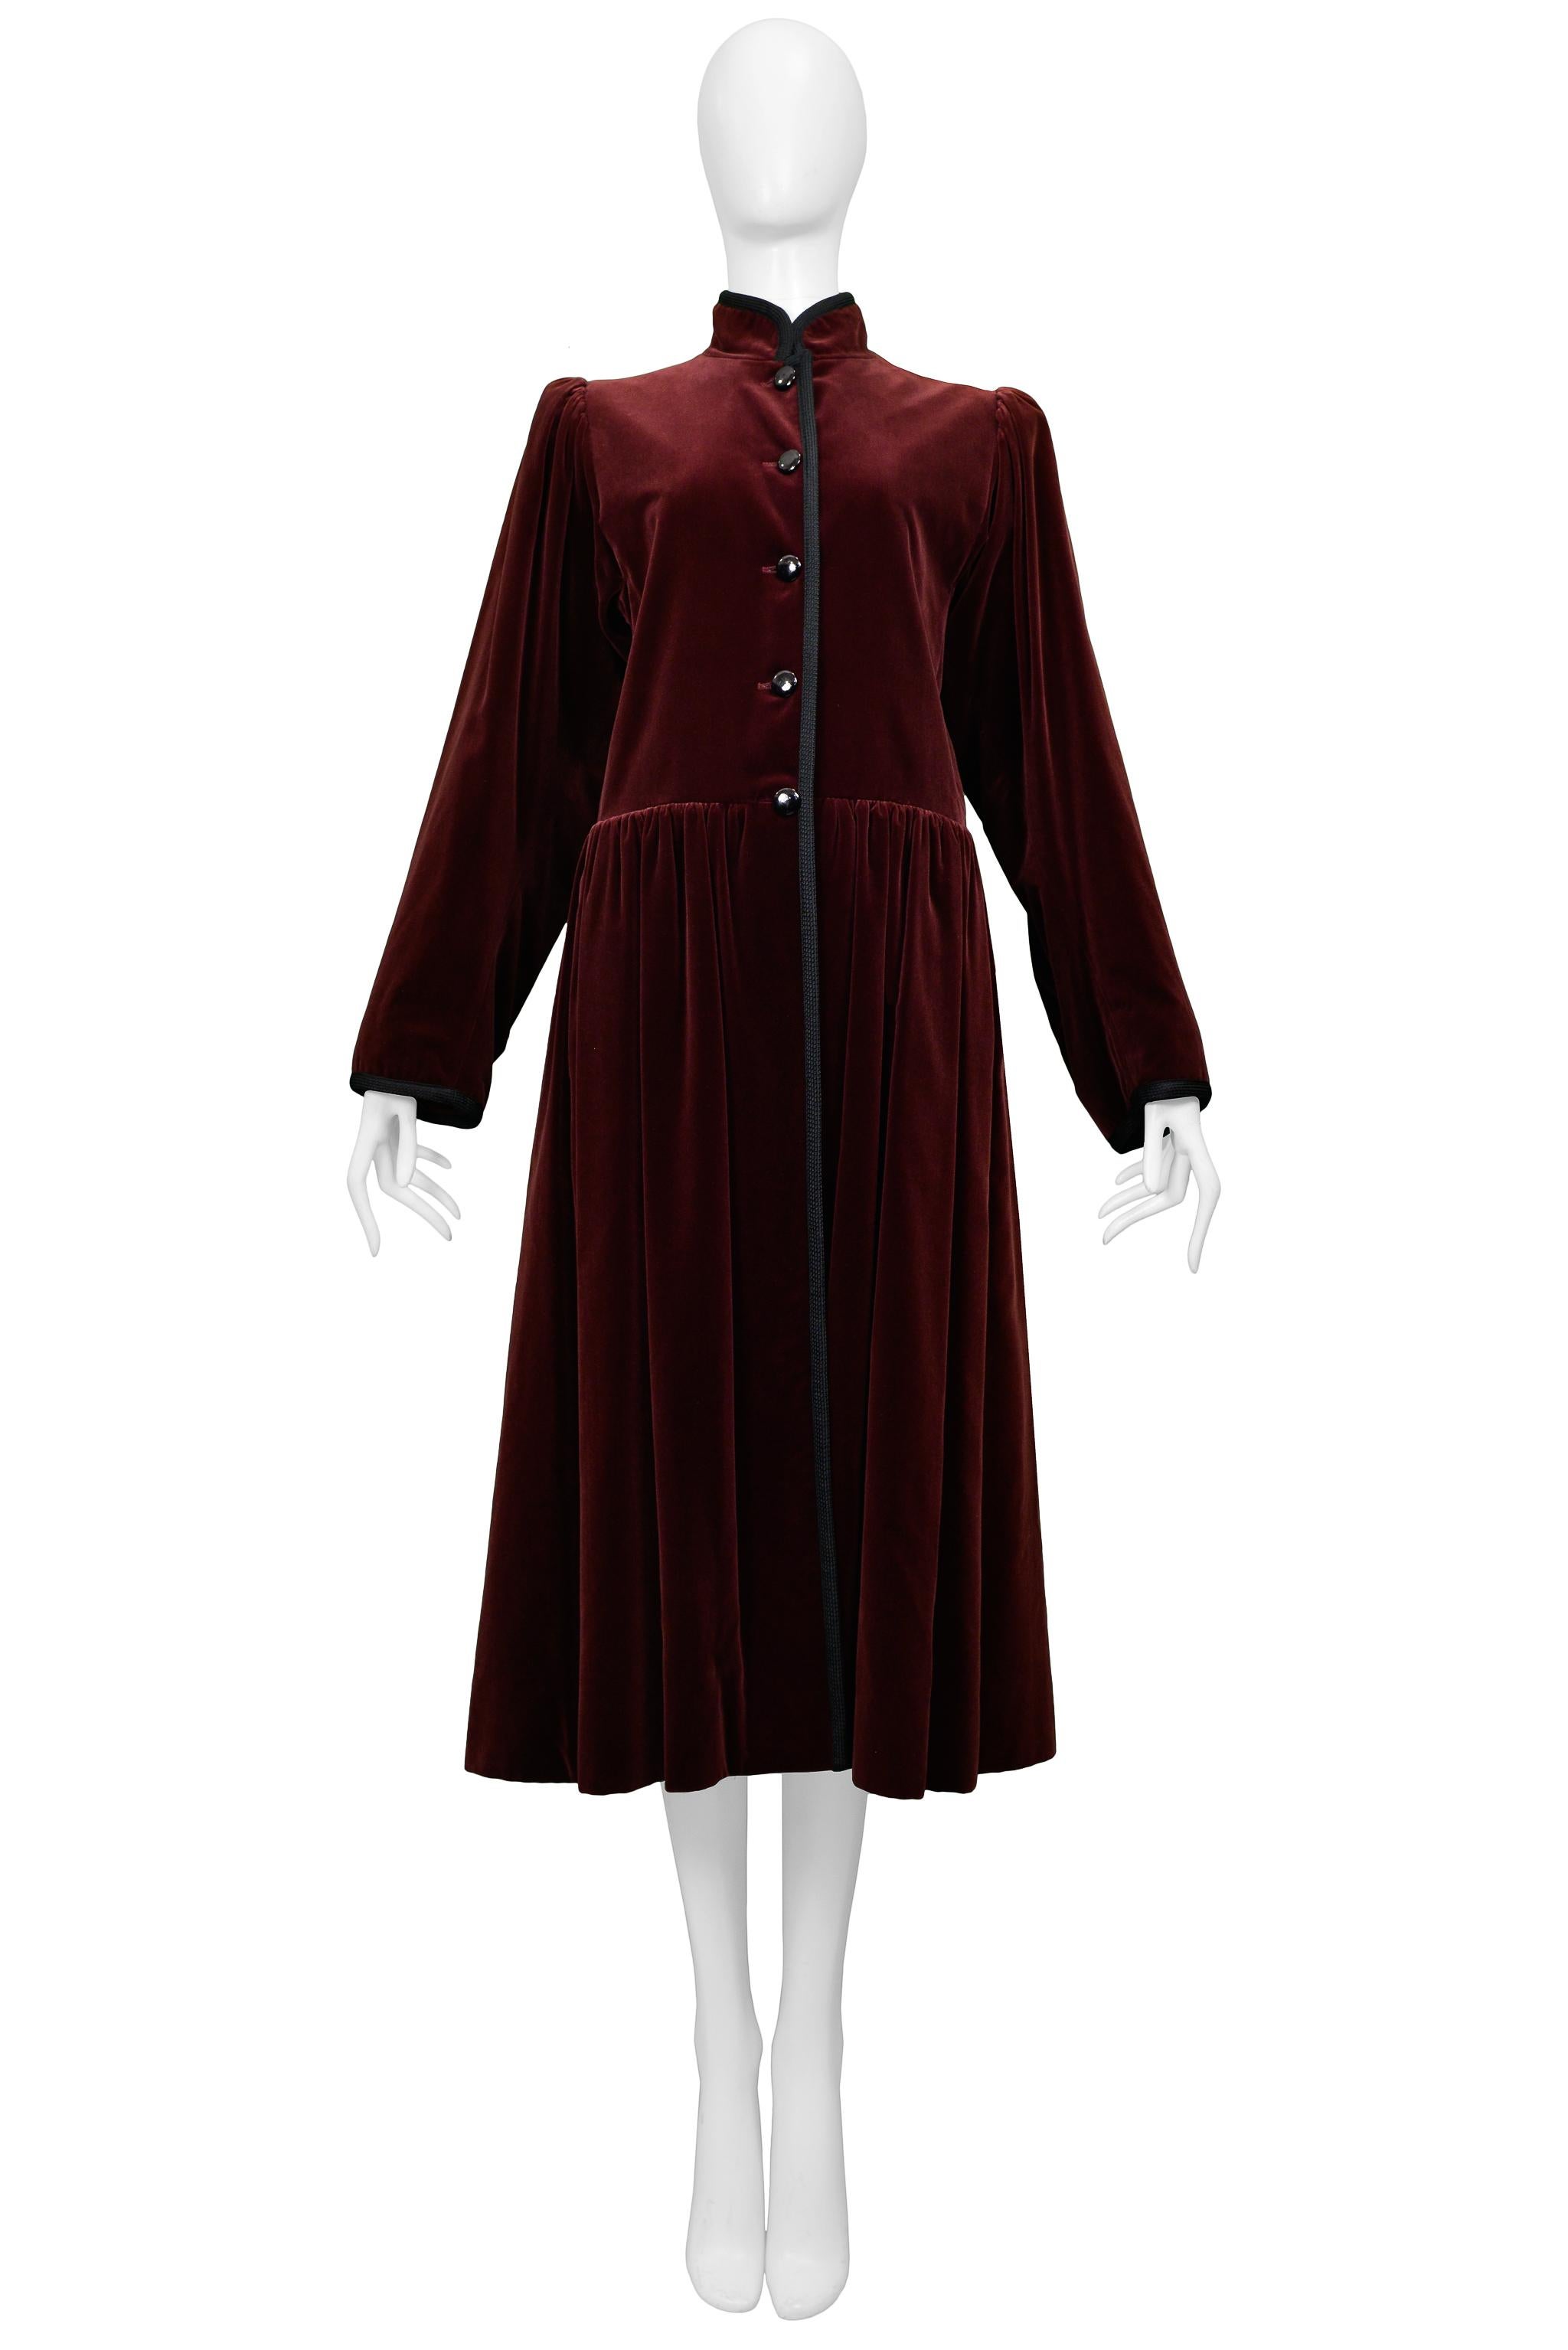 Resurrection Vintage is excited to offer a classic vintage Yves Saint Laurent burgundy velvet coat featuring a high collar, slightly high empire waistline, gathered skirt, contrasting black trim and buttons, and silk lining.

Yves Saint Laurent
Size